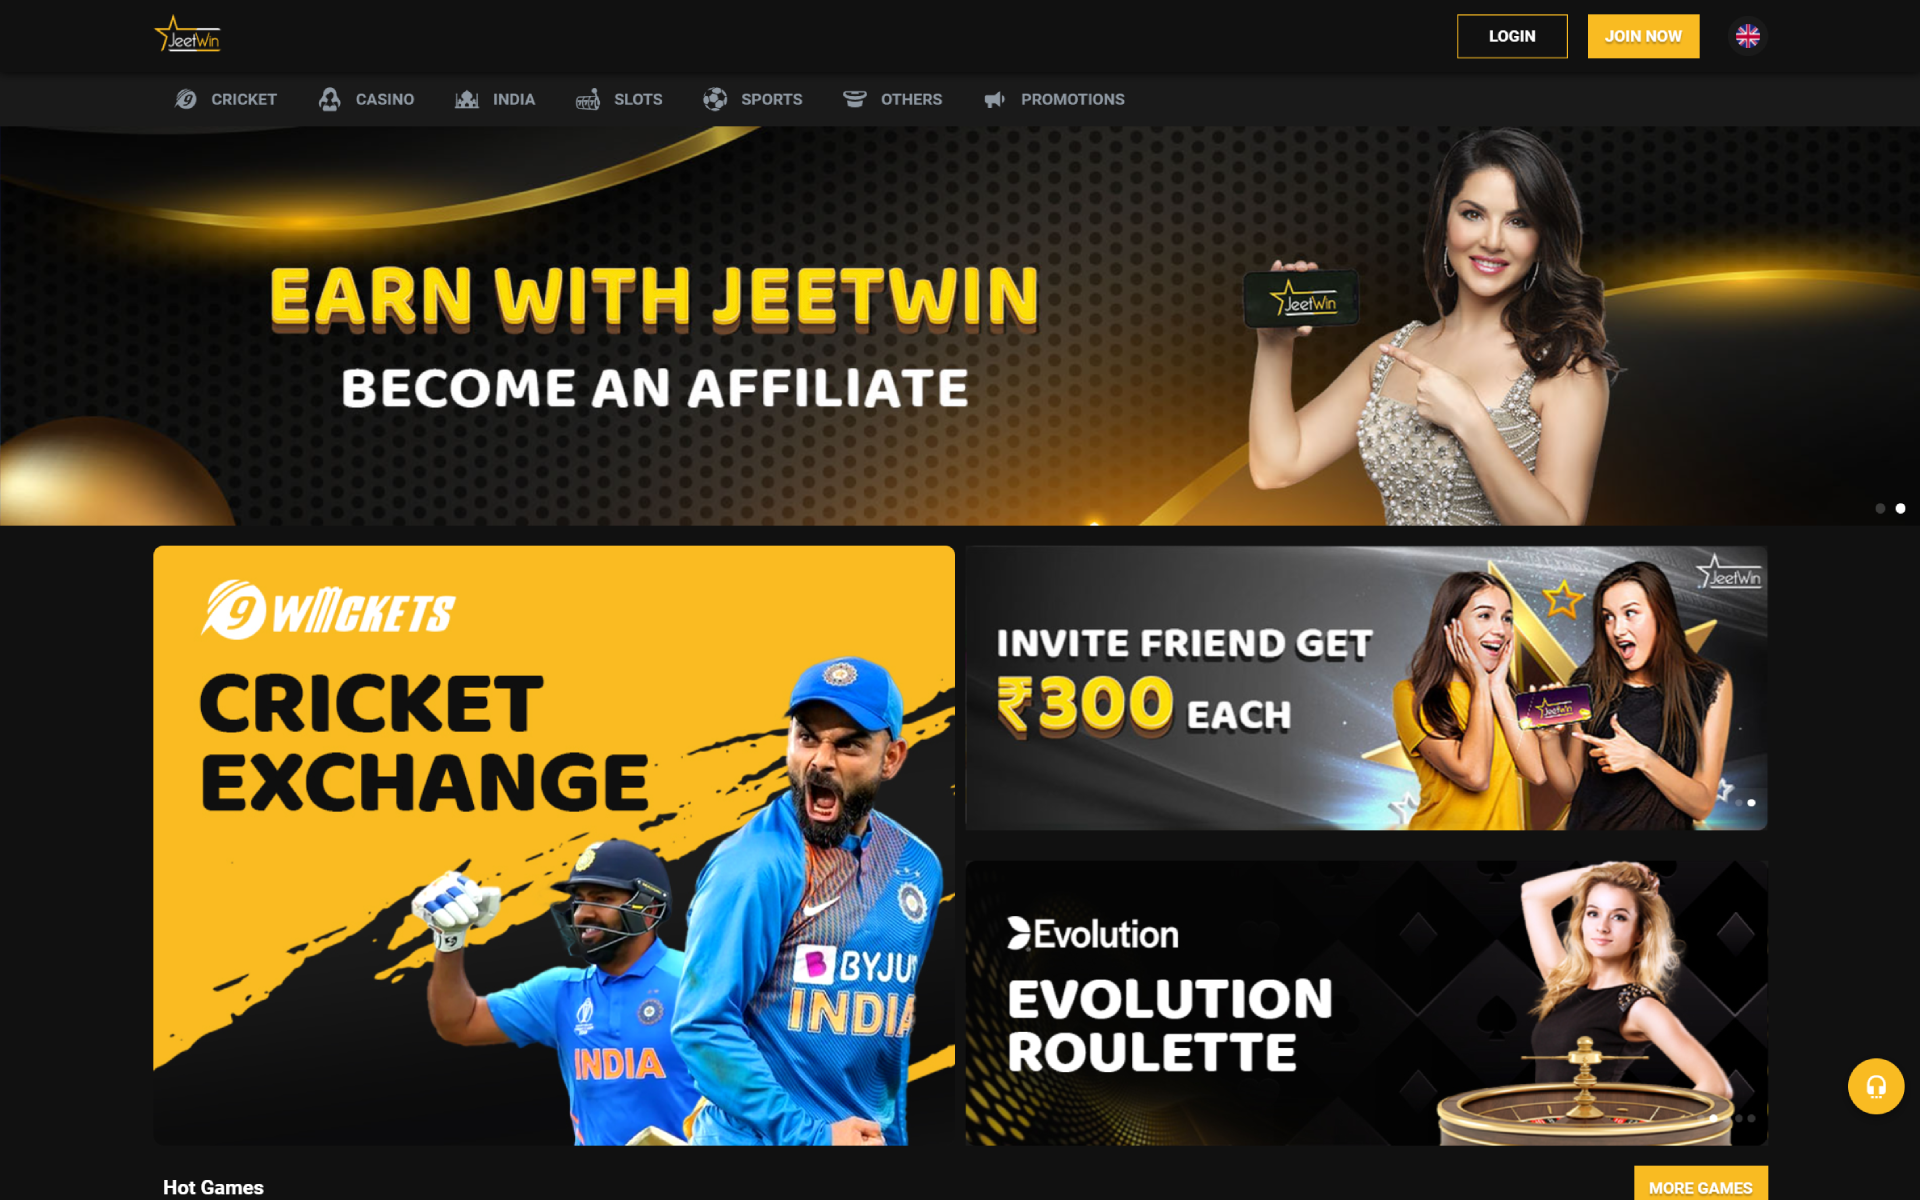 Go to the official Jeetwin website and create an account.